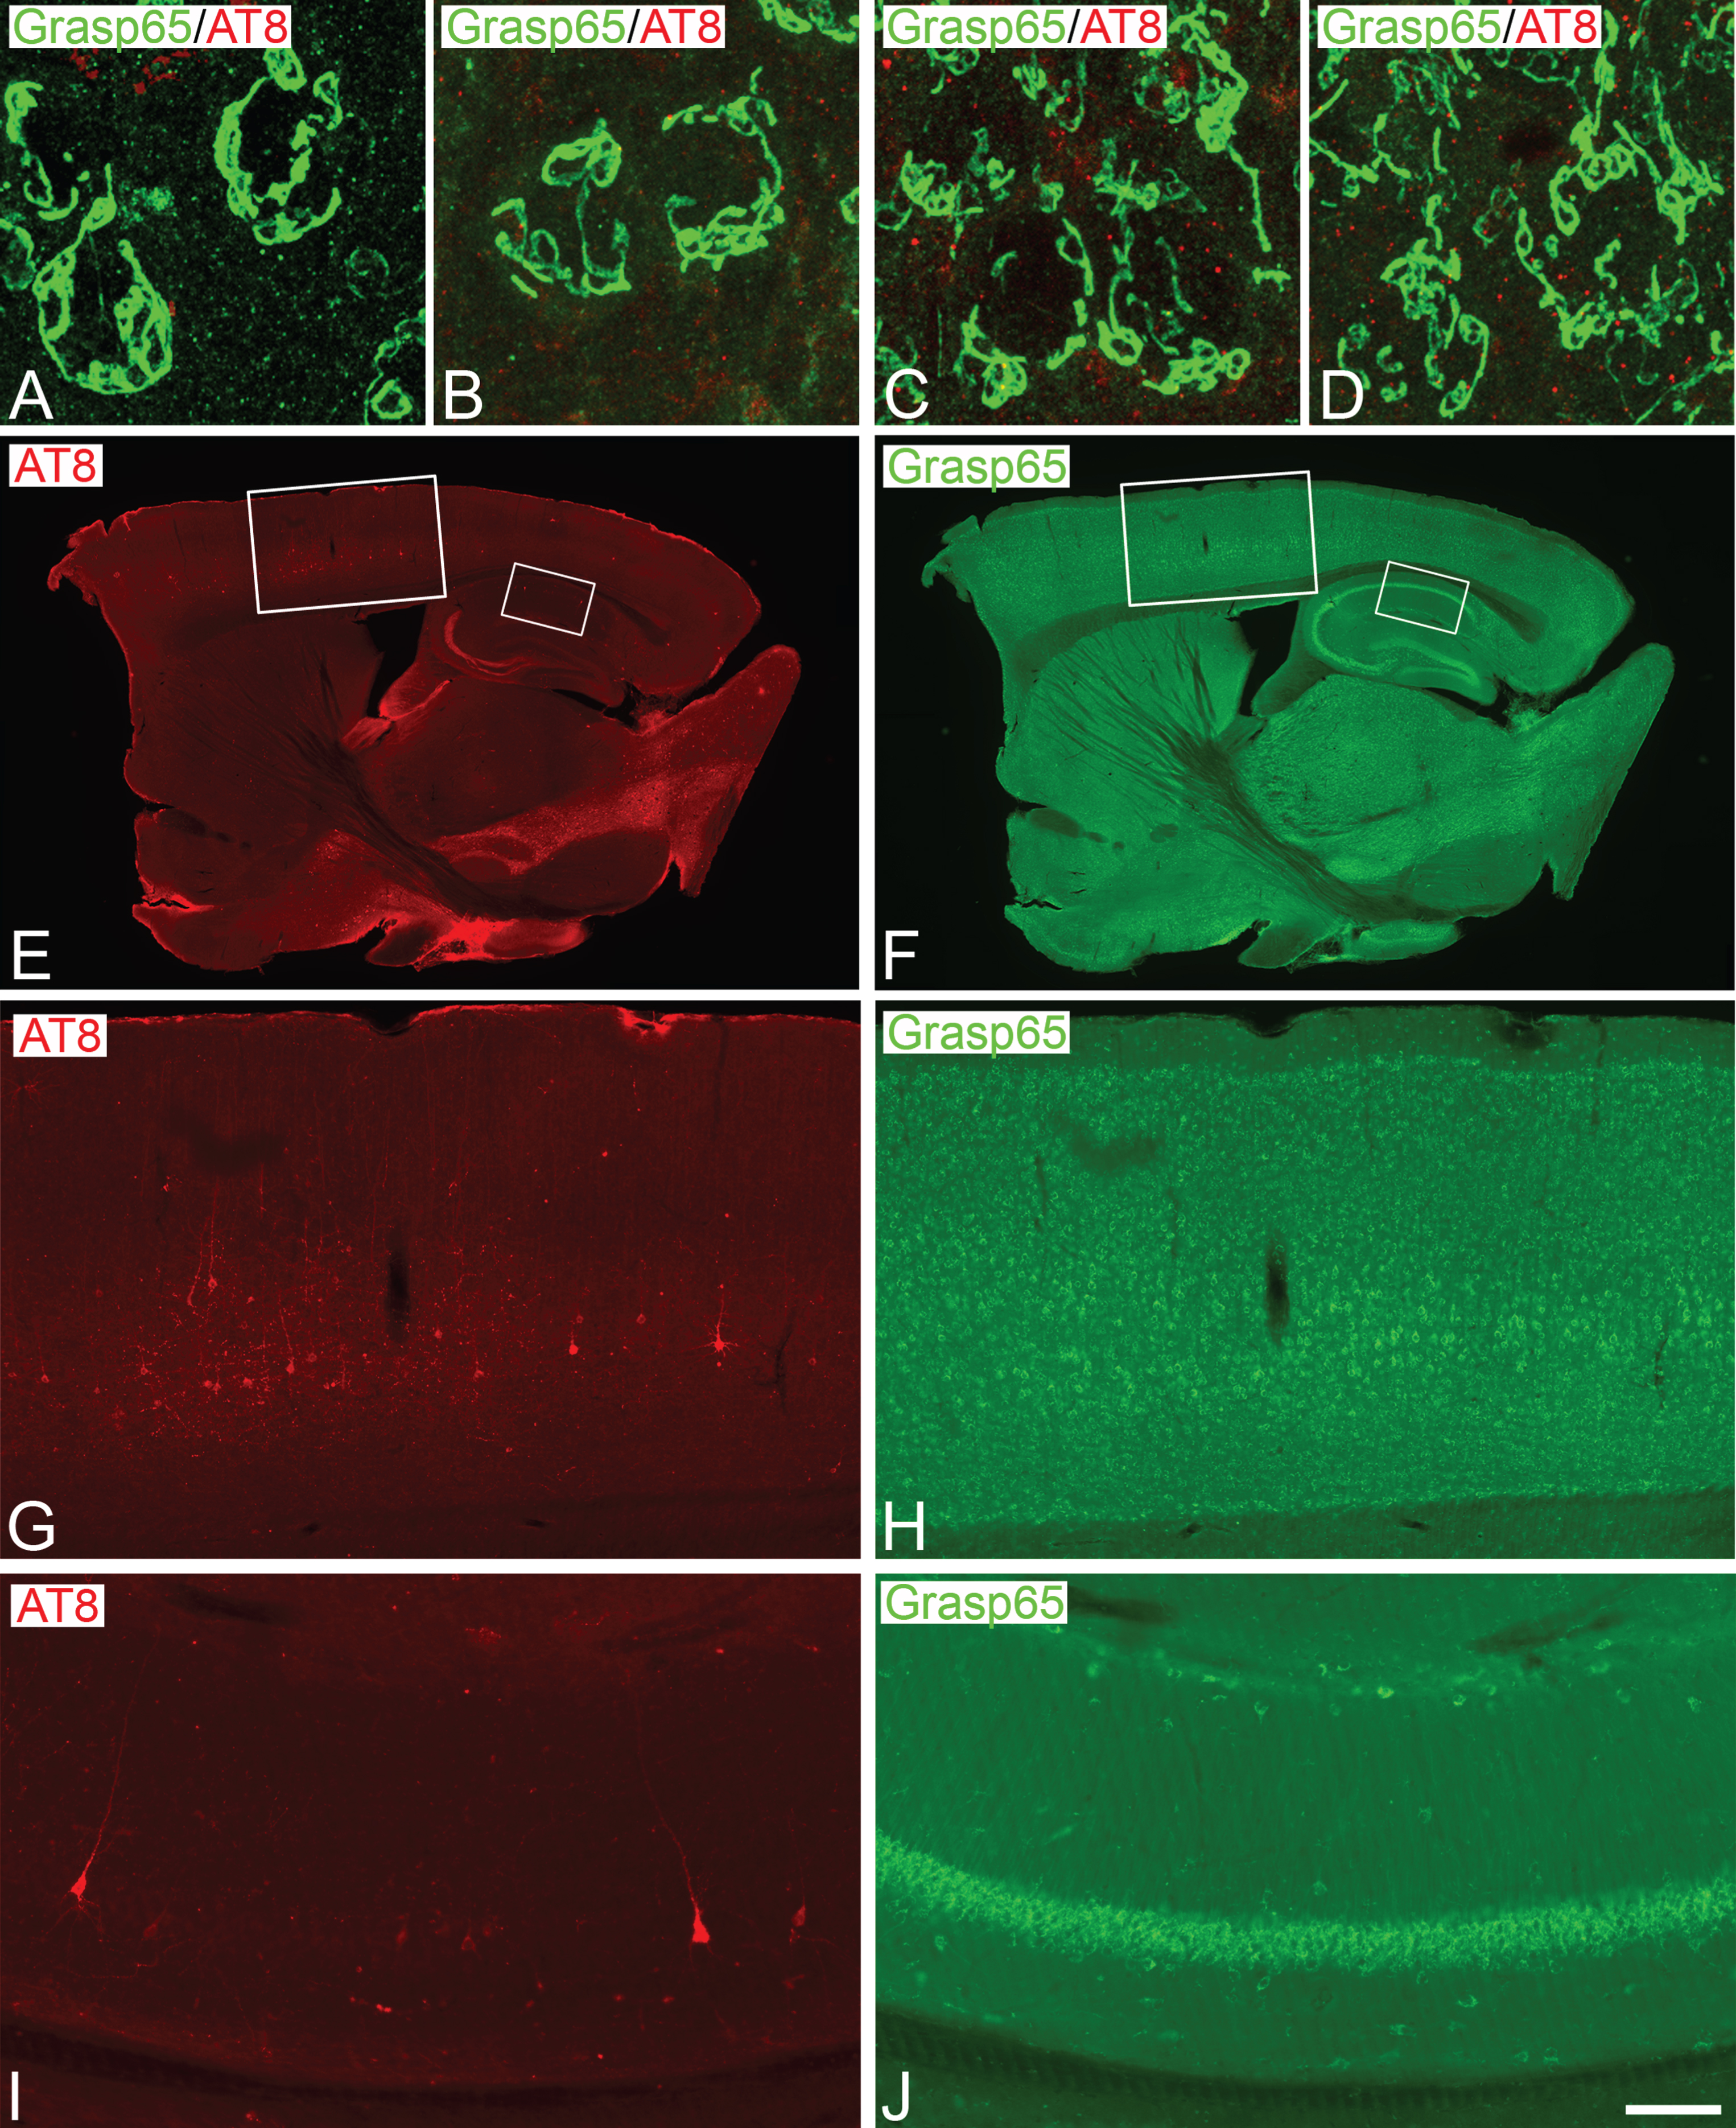 Distribution of Grasp65 in the GA of neurons from P301S and wild-type mice. A–D) Confocal stack projection images taken from Grasp 65/AT8 double-immunostained sections from the hindlimb region of the somatosensory neocortex (A, B) and the CA1 hippocampal region (C, D) of wild-type (A, C) and P301 (B, D) animals aged 2 weeks. Note the absence of AT8+ neurons in both regions at this age and the similar appearance of the Grasp65-ir GA elements between wild-type and P301S animals. E−J show pairs of conventional fluorescence images taken from a Grasp 65/AT8 double-immunostained parasagital section from the brain of 36-week-old P301 mice showing the distribution of AT8+ neurons in the somatosensory cortex (G, H) and the CA1 hippocampal region (I, J). Squared zones in E and F are shown at higher magnification in G−J. Scale bar shown in J indicates 7 μm in A−D, 1035 μm in E−F, 210 μm in G−H and 100 μm in I−J.